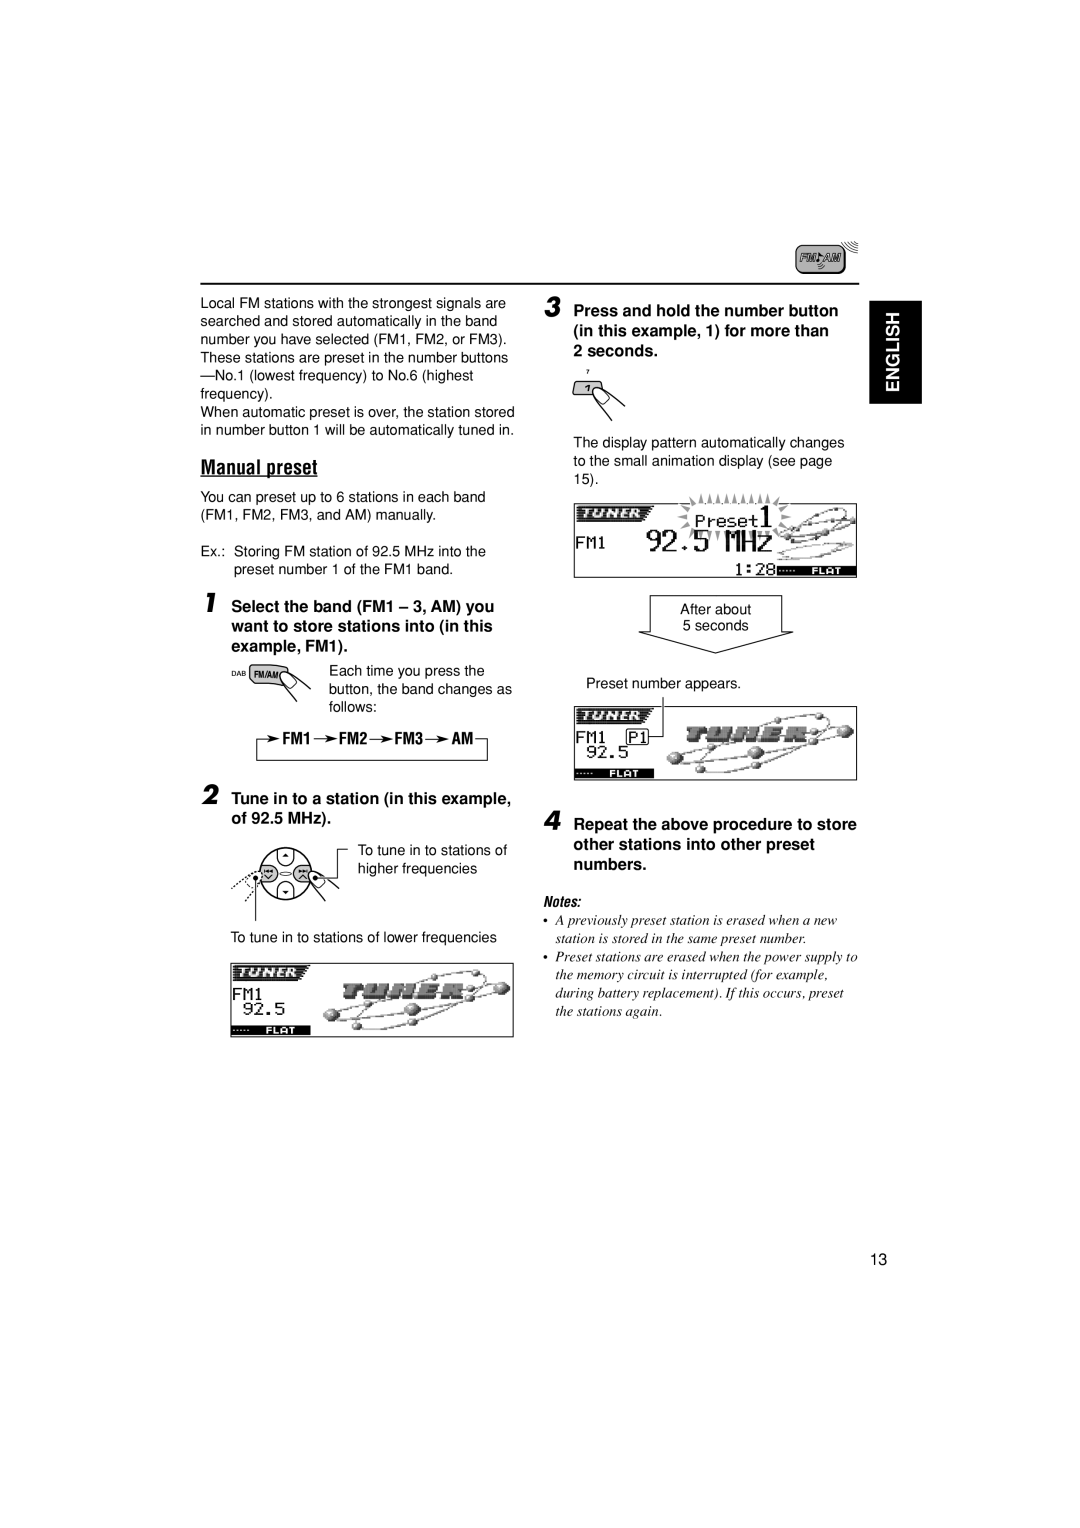 JVC KD-LH401 service manual Manual preset, English, Tune in to a station in this example, of 92.5 MHz 